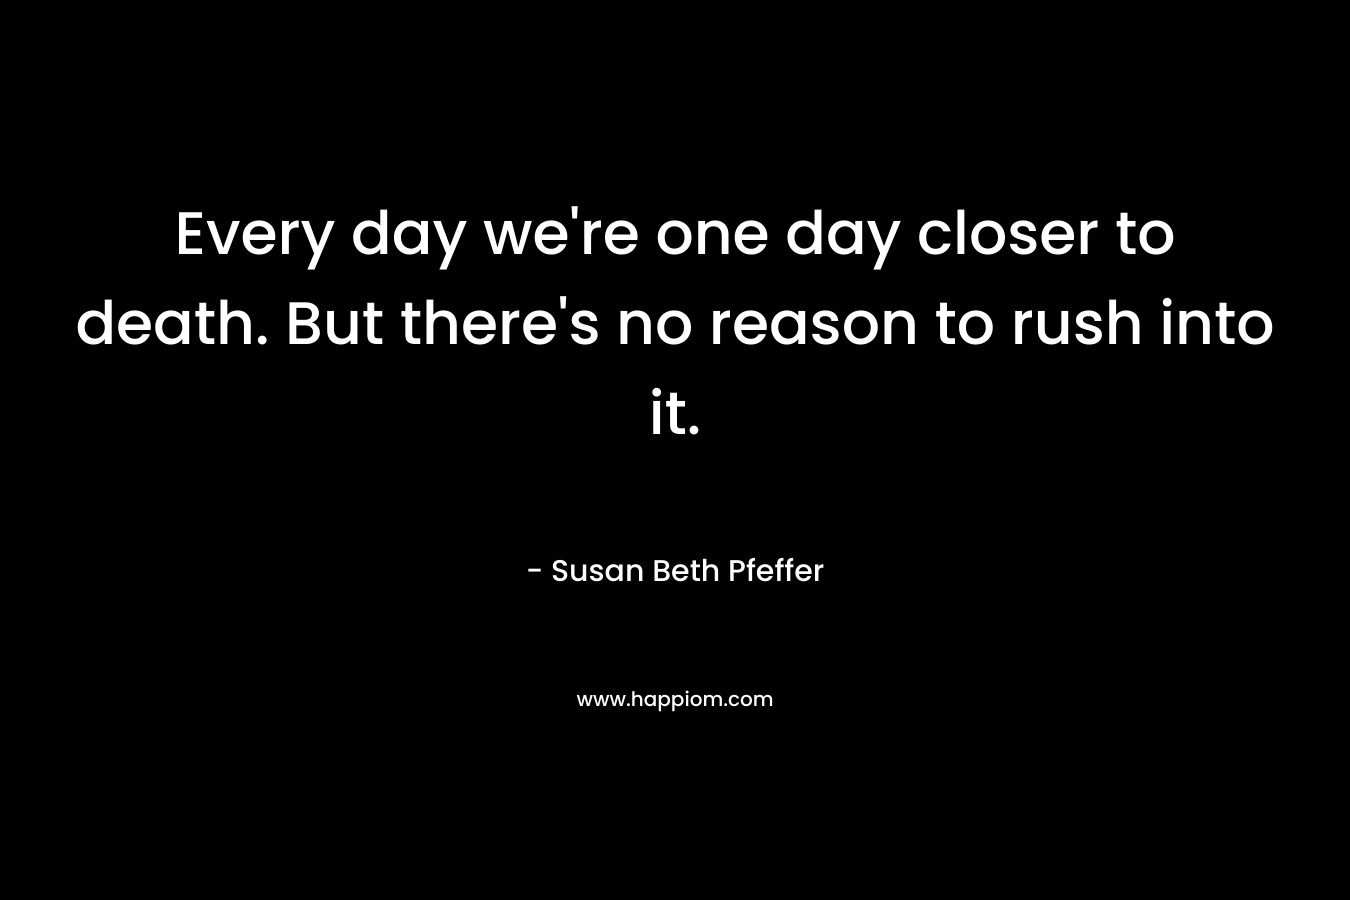 Every day we’re one day closer to death. But there’s no reason to rush into it. – Susan Beth Pfeffer